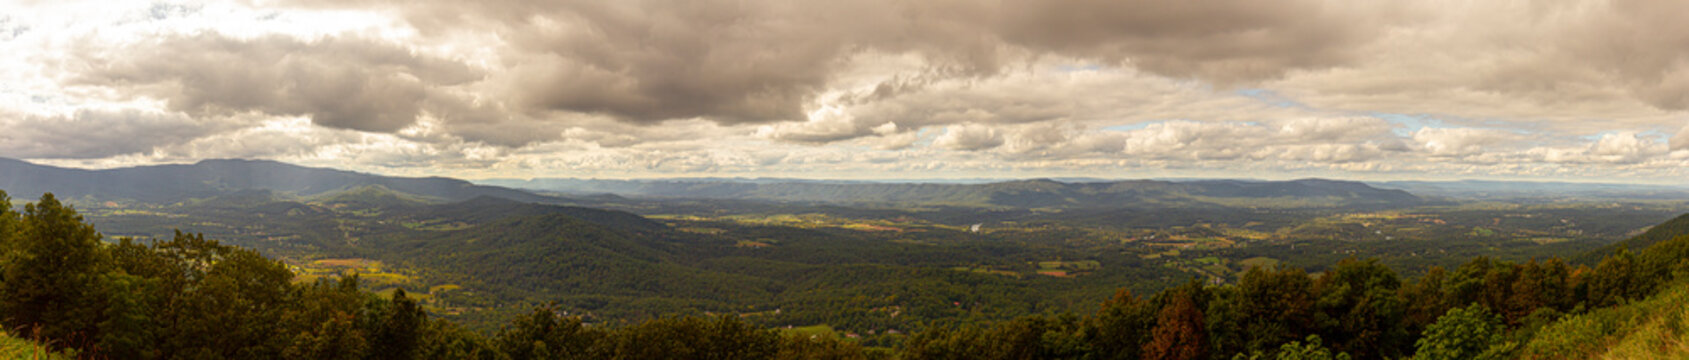 Panoramic view if Shenandoah valley observed from a scenic overlook by skyline drive. image features vast forests covering hills and mountains of blue ridge mountain range. © Grandbrothers